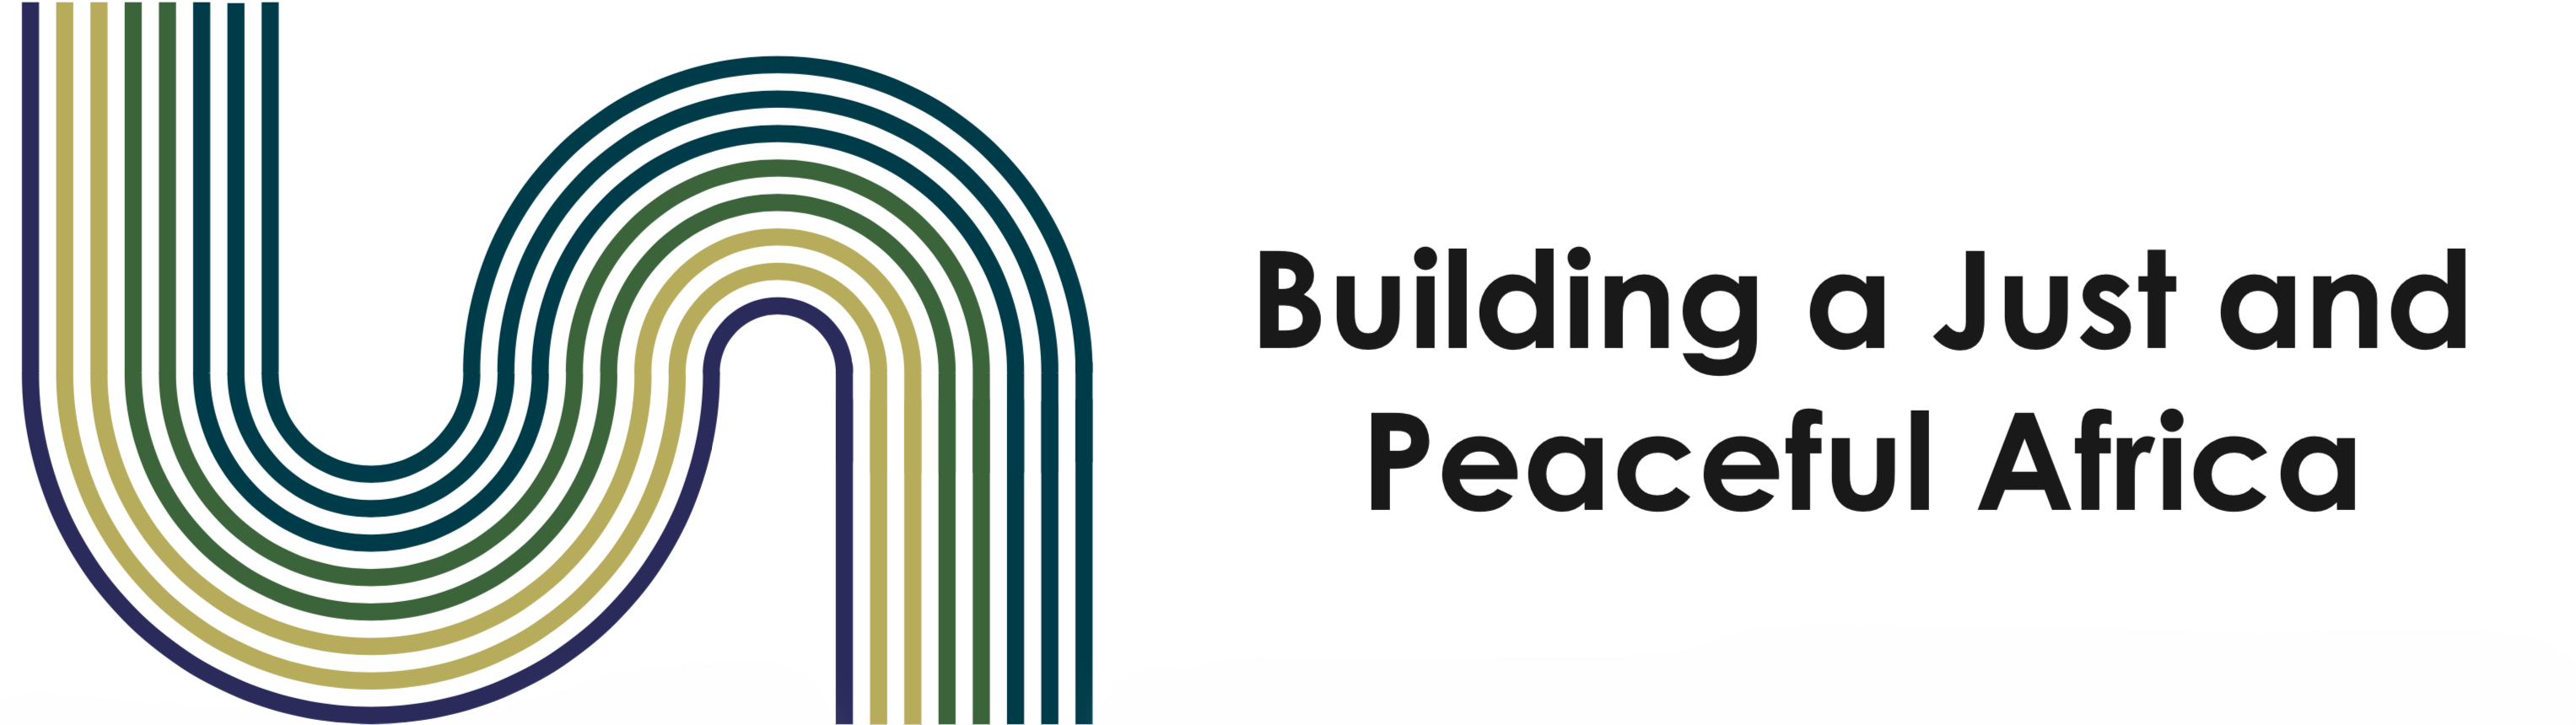 Graphic made of colored lines with the text "Building a Just and Peaceful Africa"